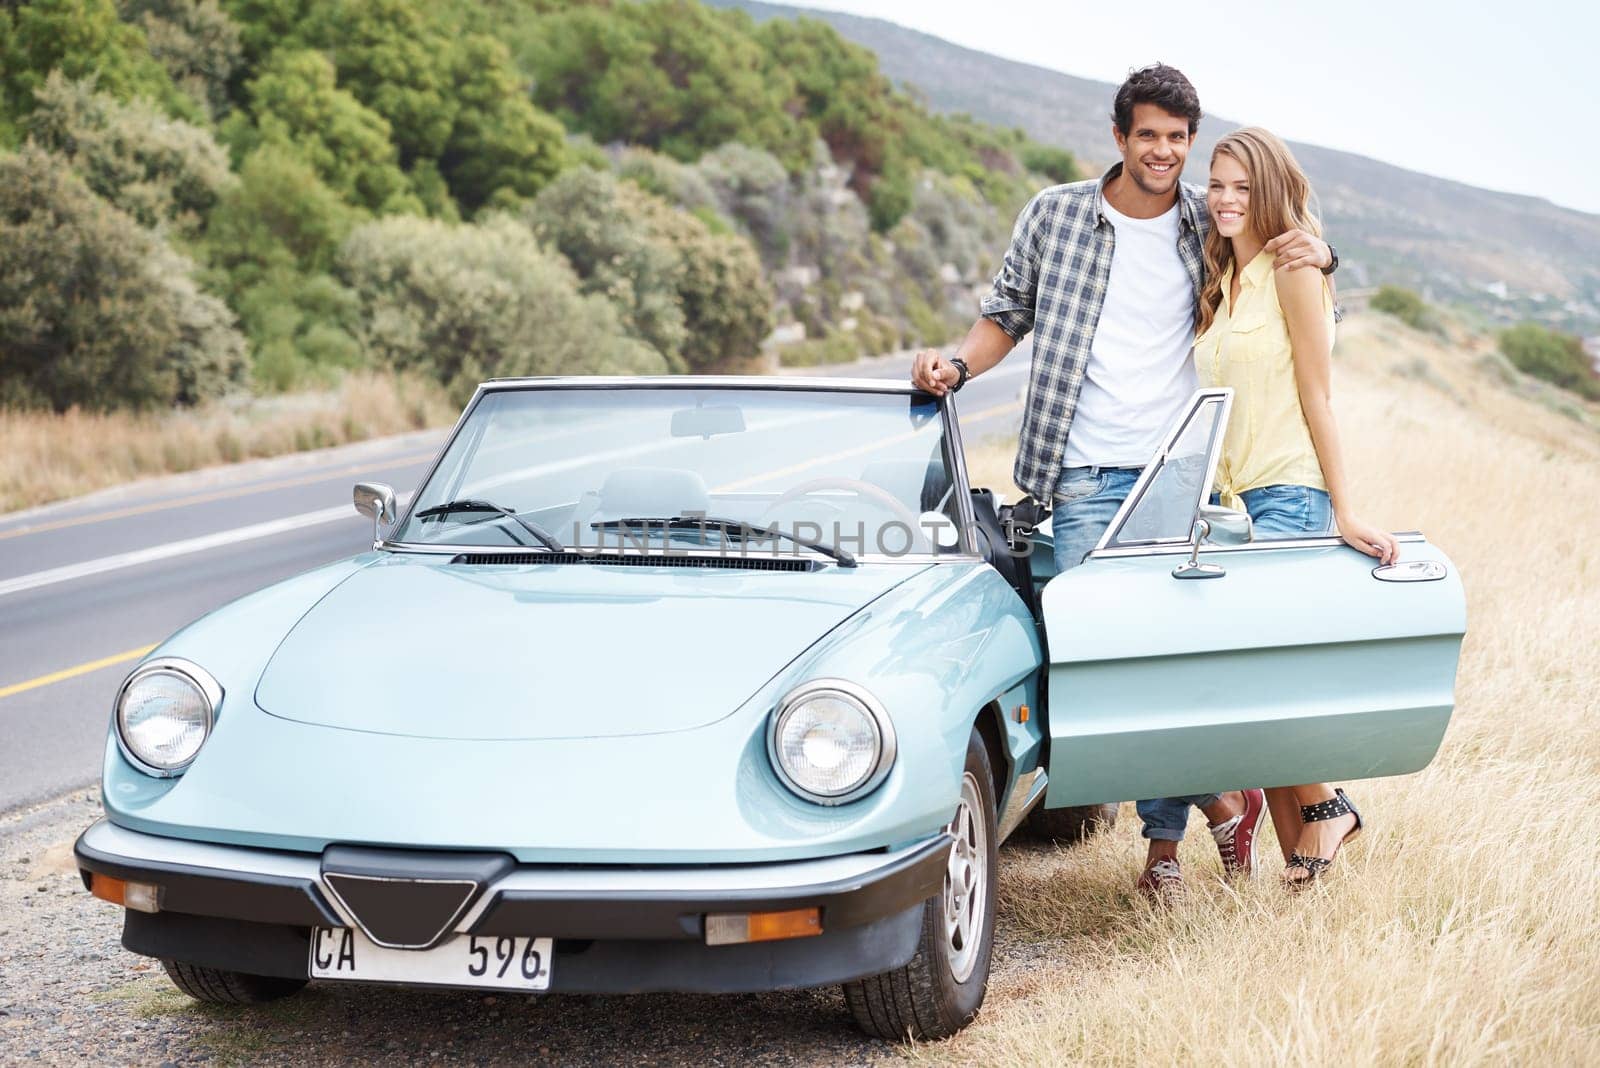 Theyre taking a trip together. A young couple standing alongside their convertible while on a road trip. by YuriArcurs